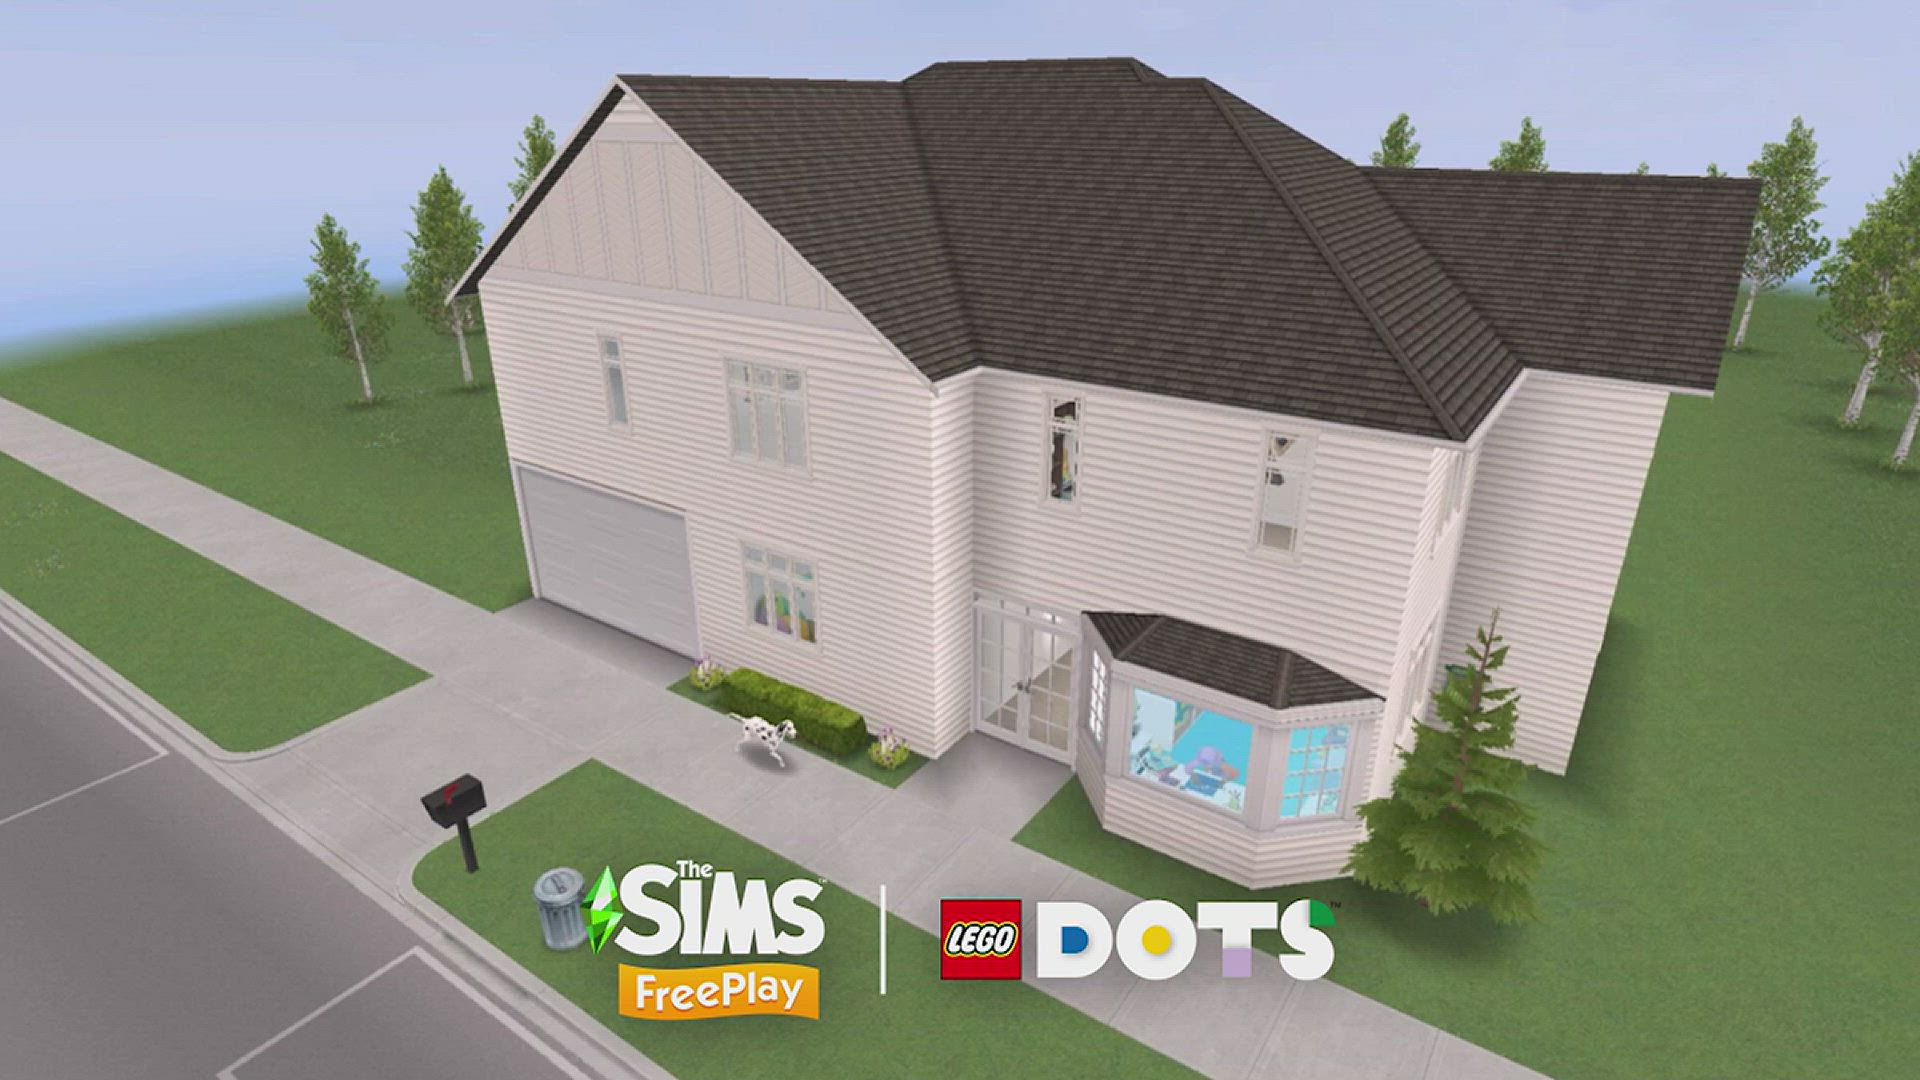 The Sims Freeplay And Lego Dots Team